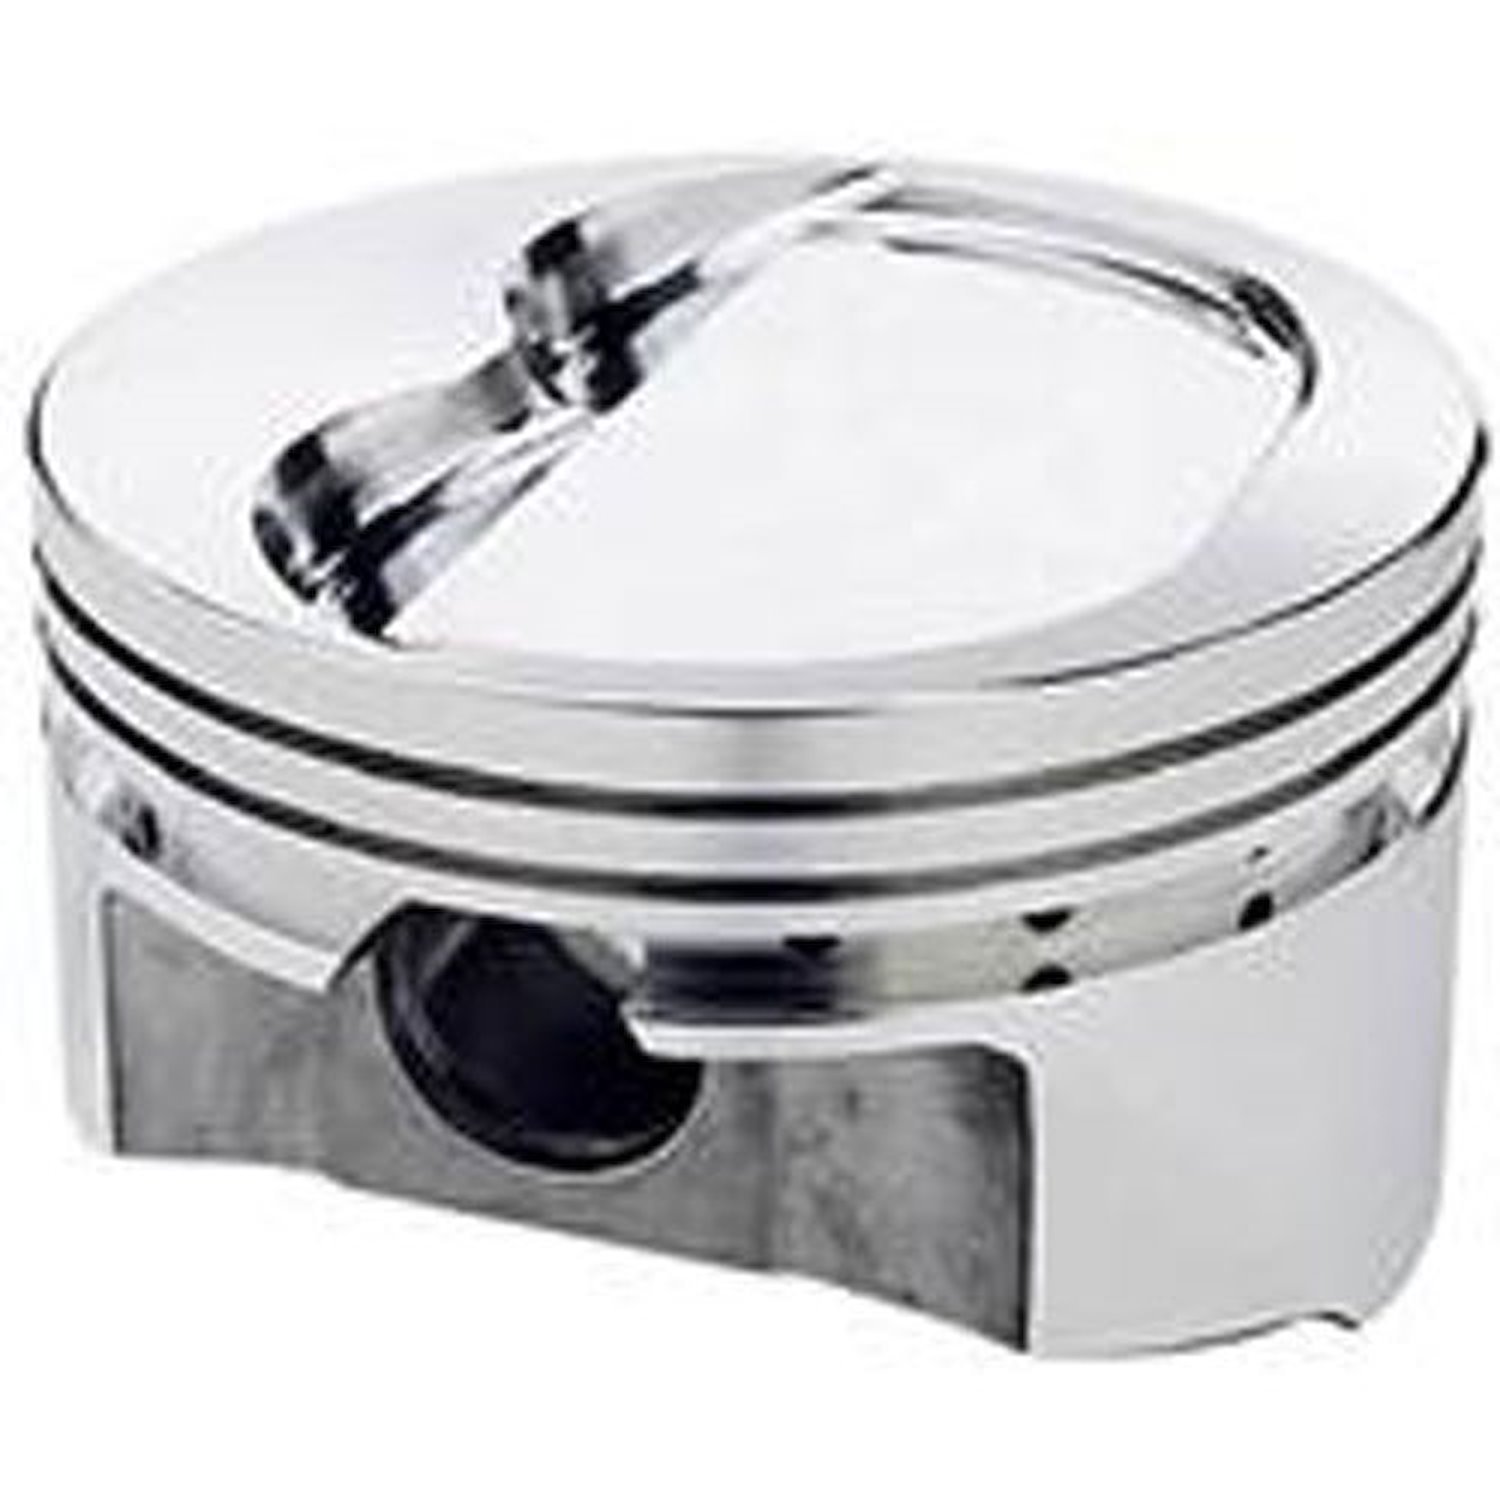 SB-Chevy Inverted Dome Pistons Bore 4.030"